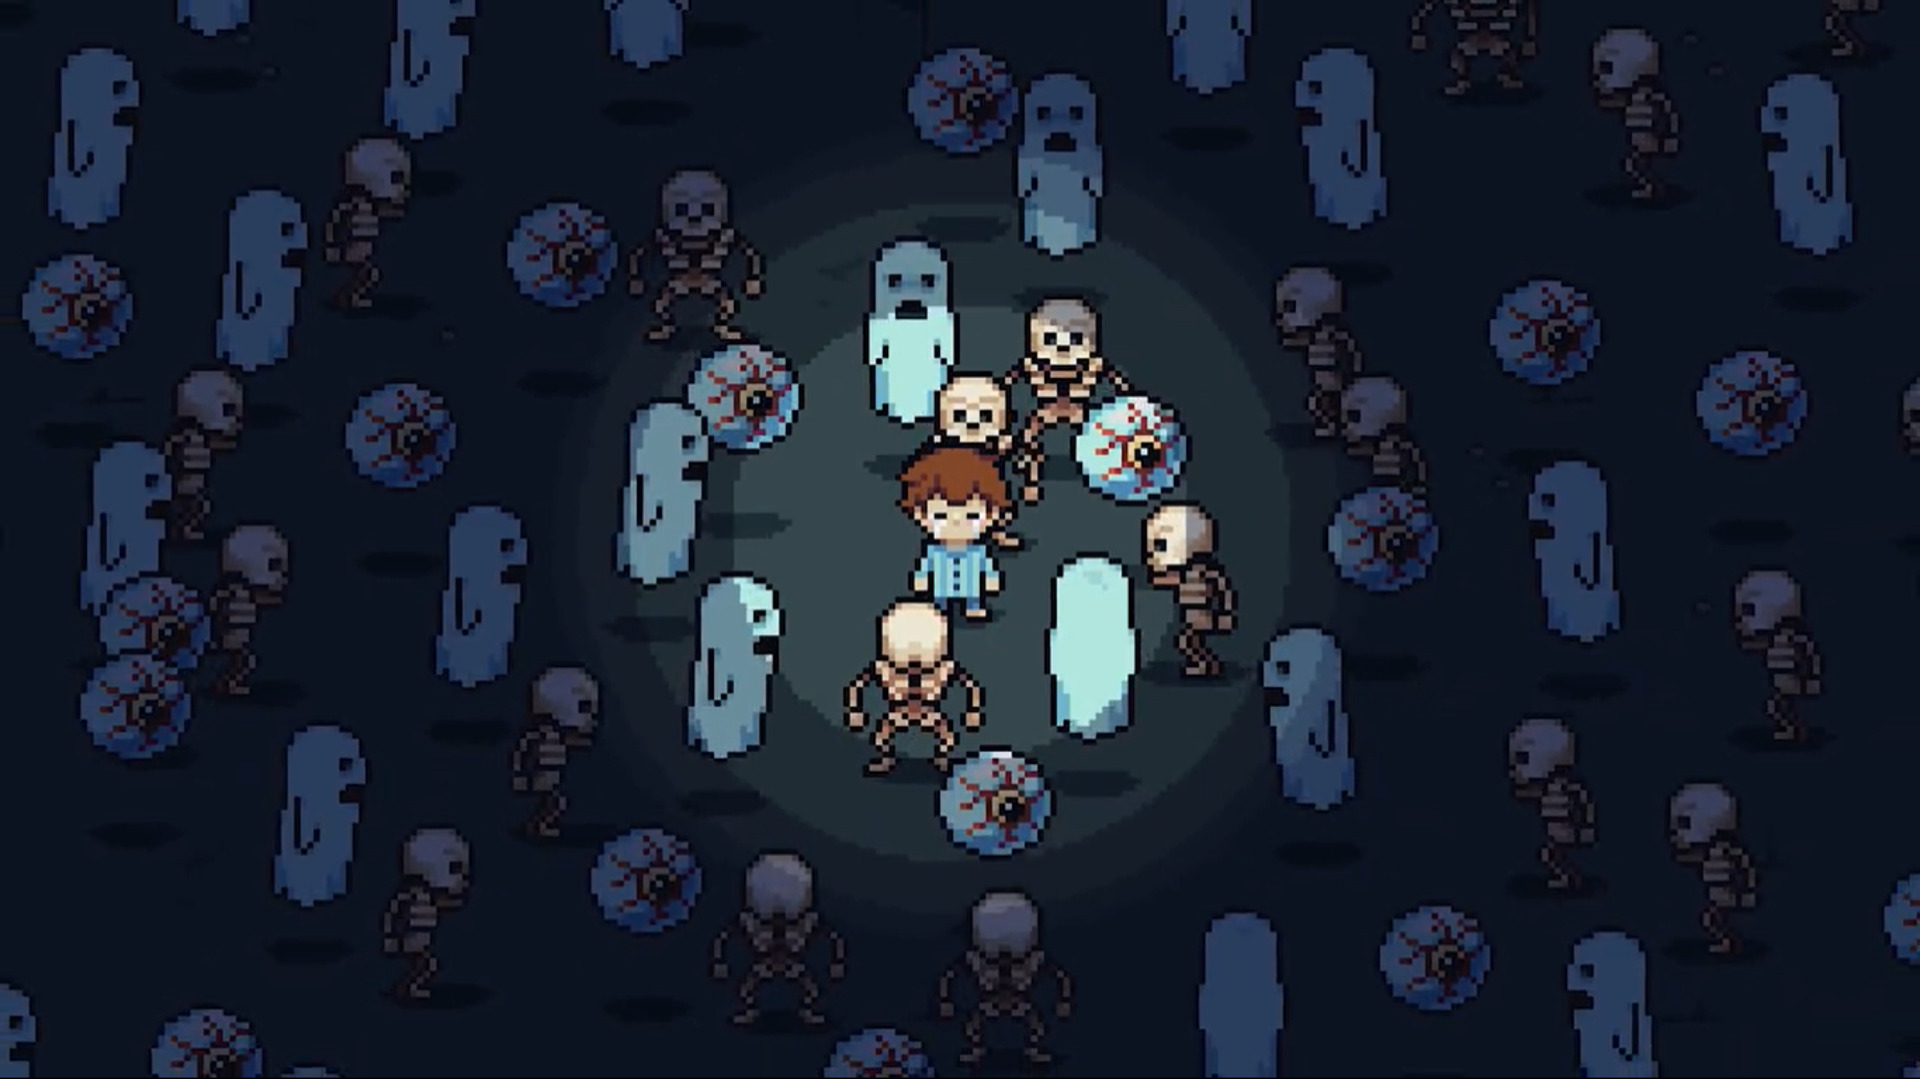 This “spooky” indie RPG is actually dark as hell, and even though it’s inspired by Zelda, Chrono Trigger, and Undertale I’ve never seen anything like it